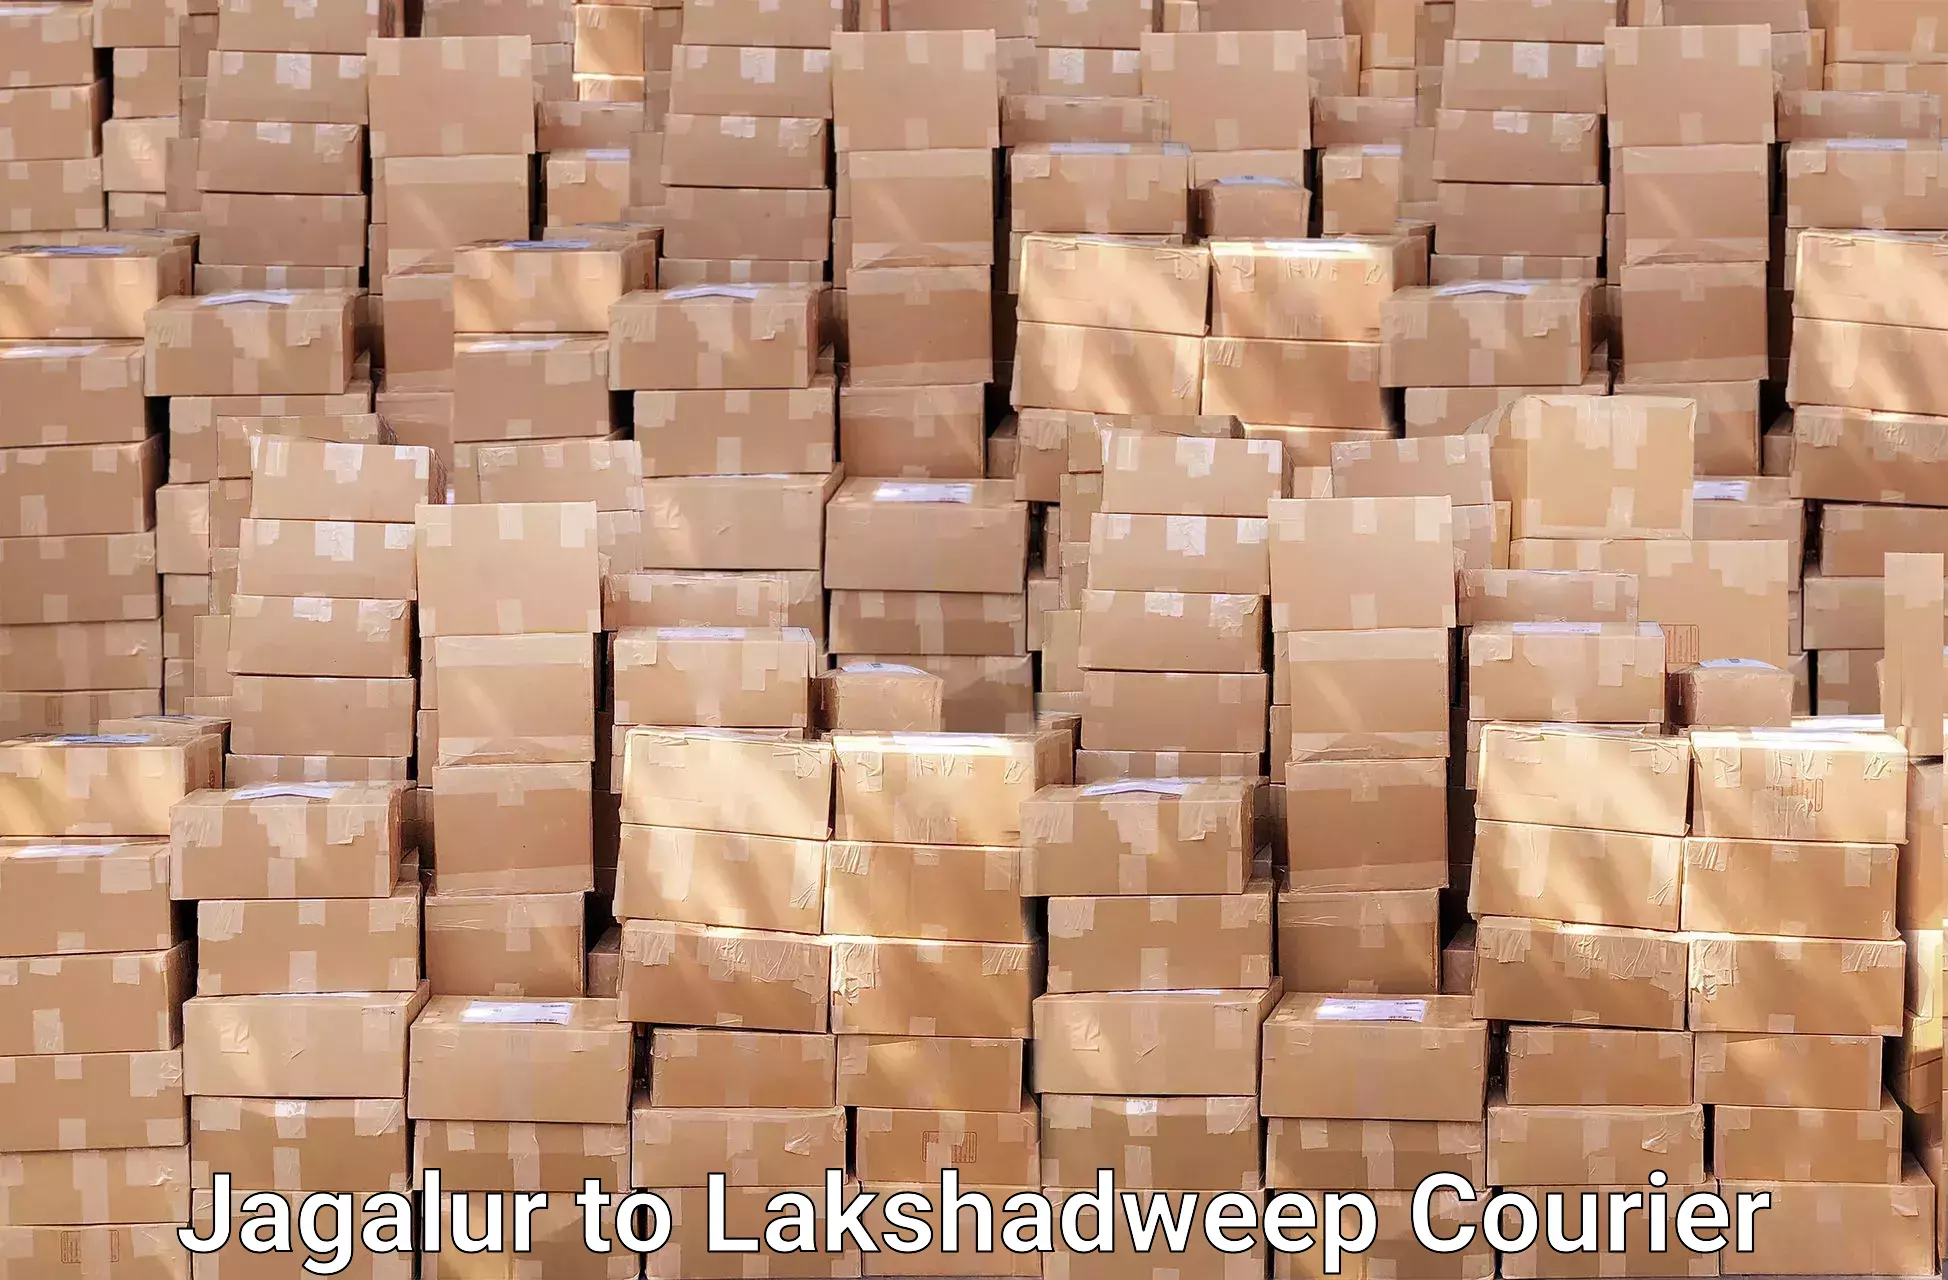 Quality relocation assistance Jagalur to Lakshadweep